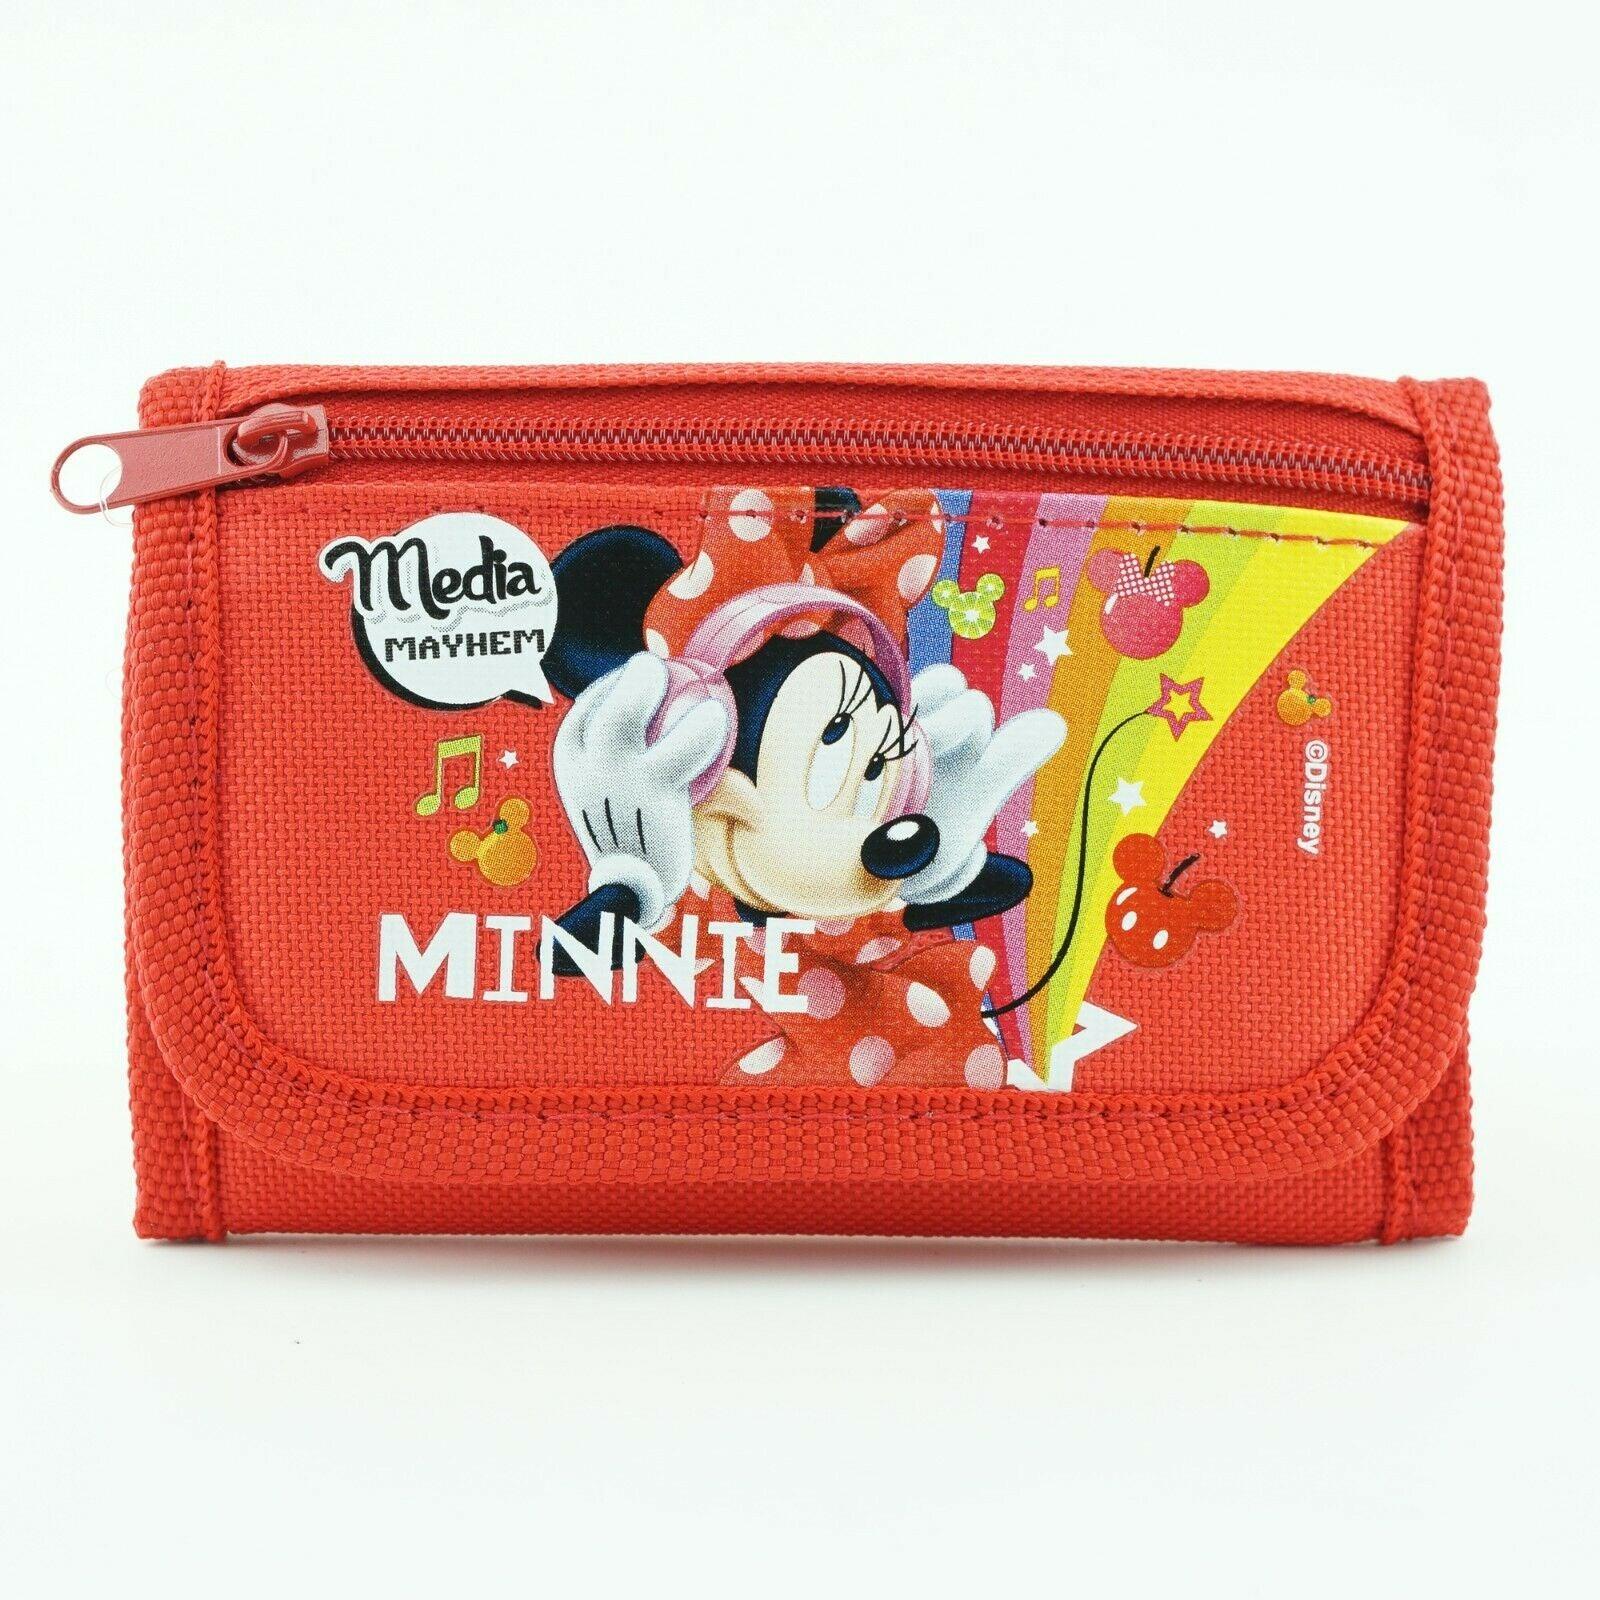 3-Fold Wallet Minnie Mouse M10